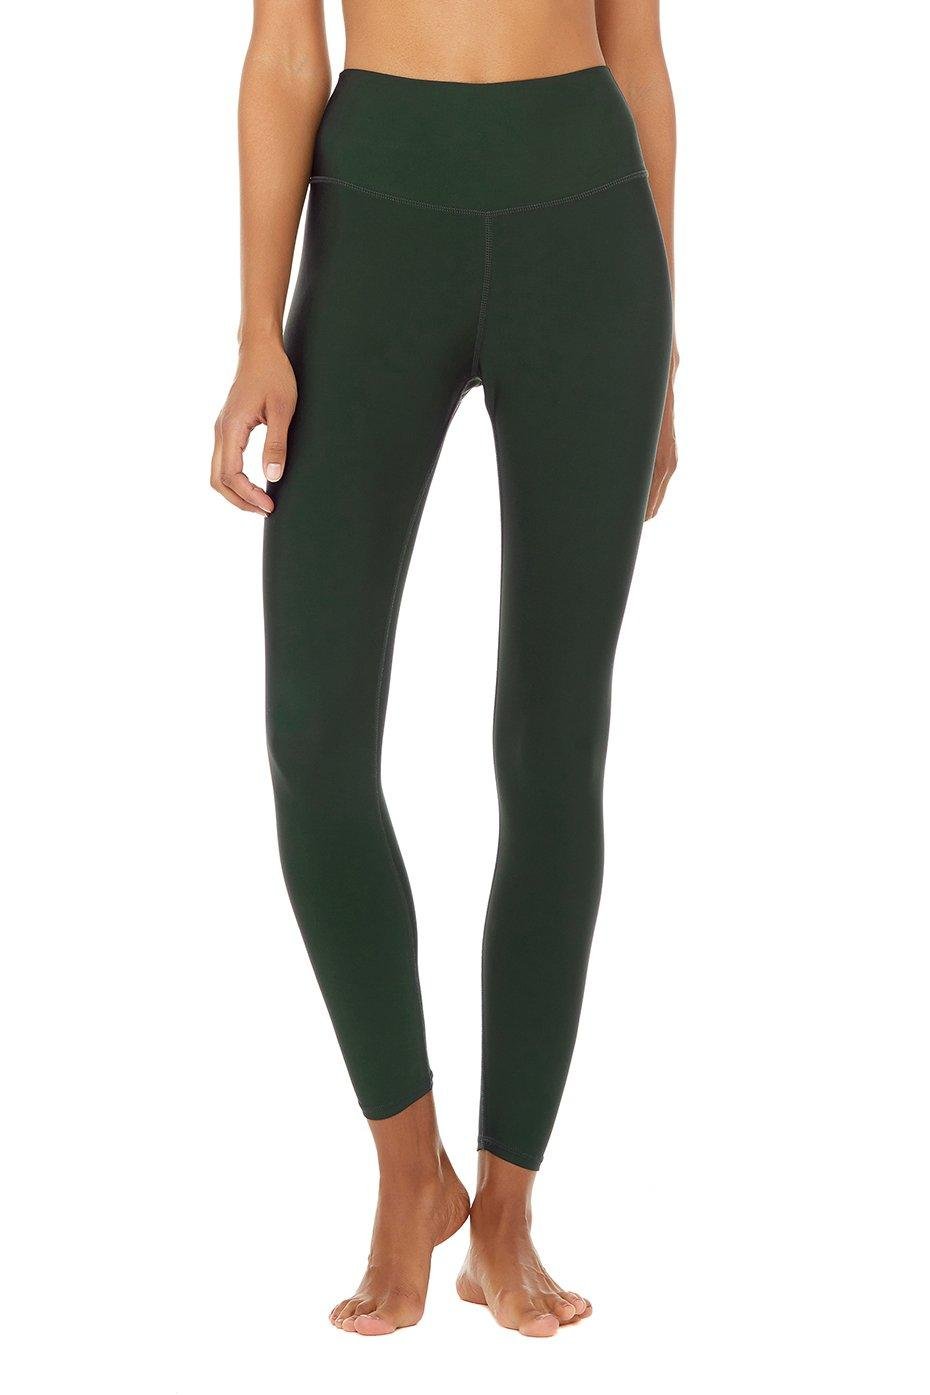 Alo Yoga ® 7/8 High-waist Airlift Legging in Forest (Green) - Lyst